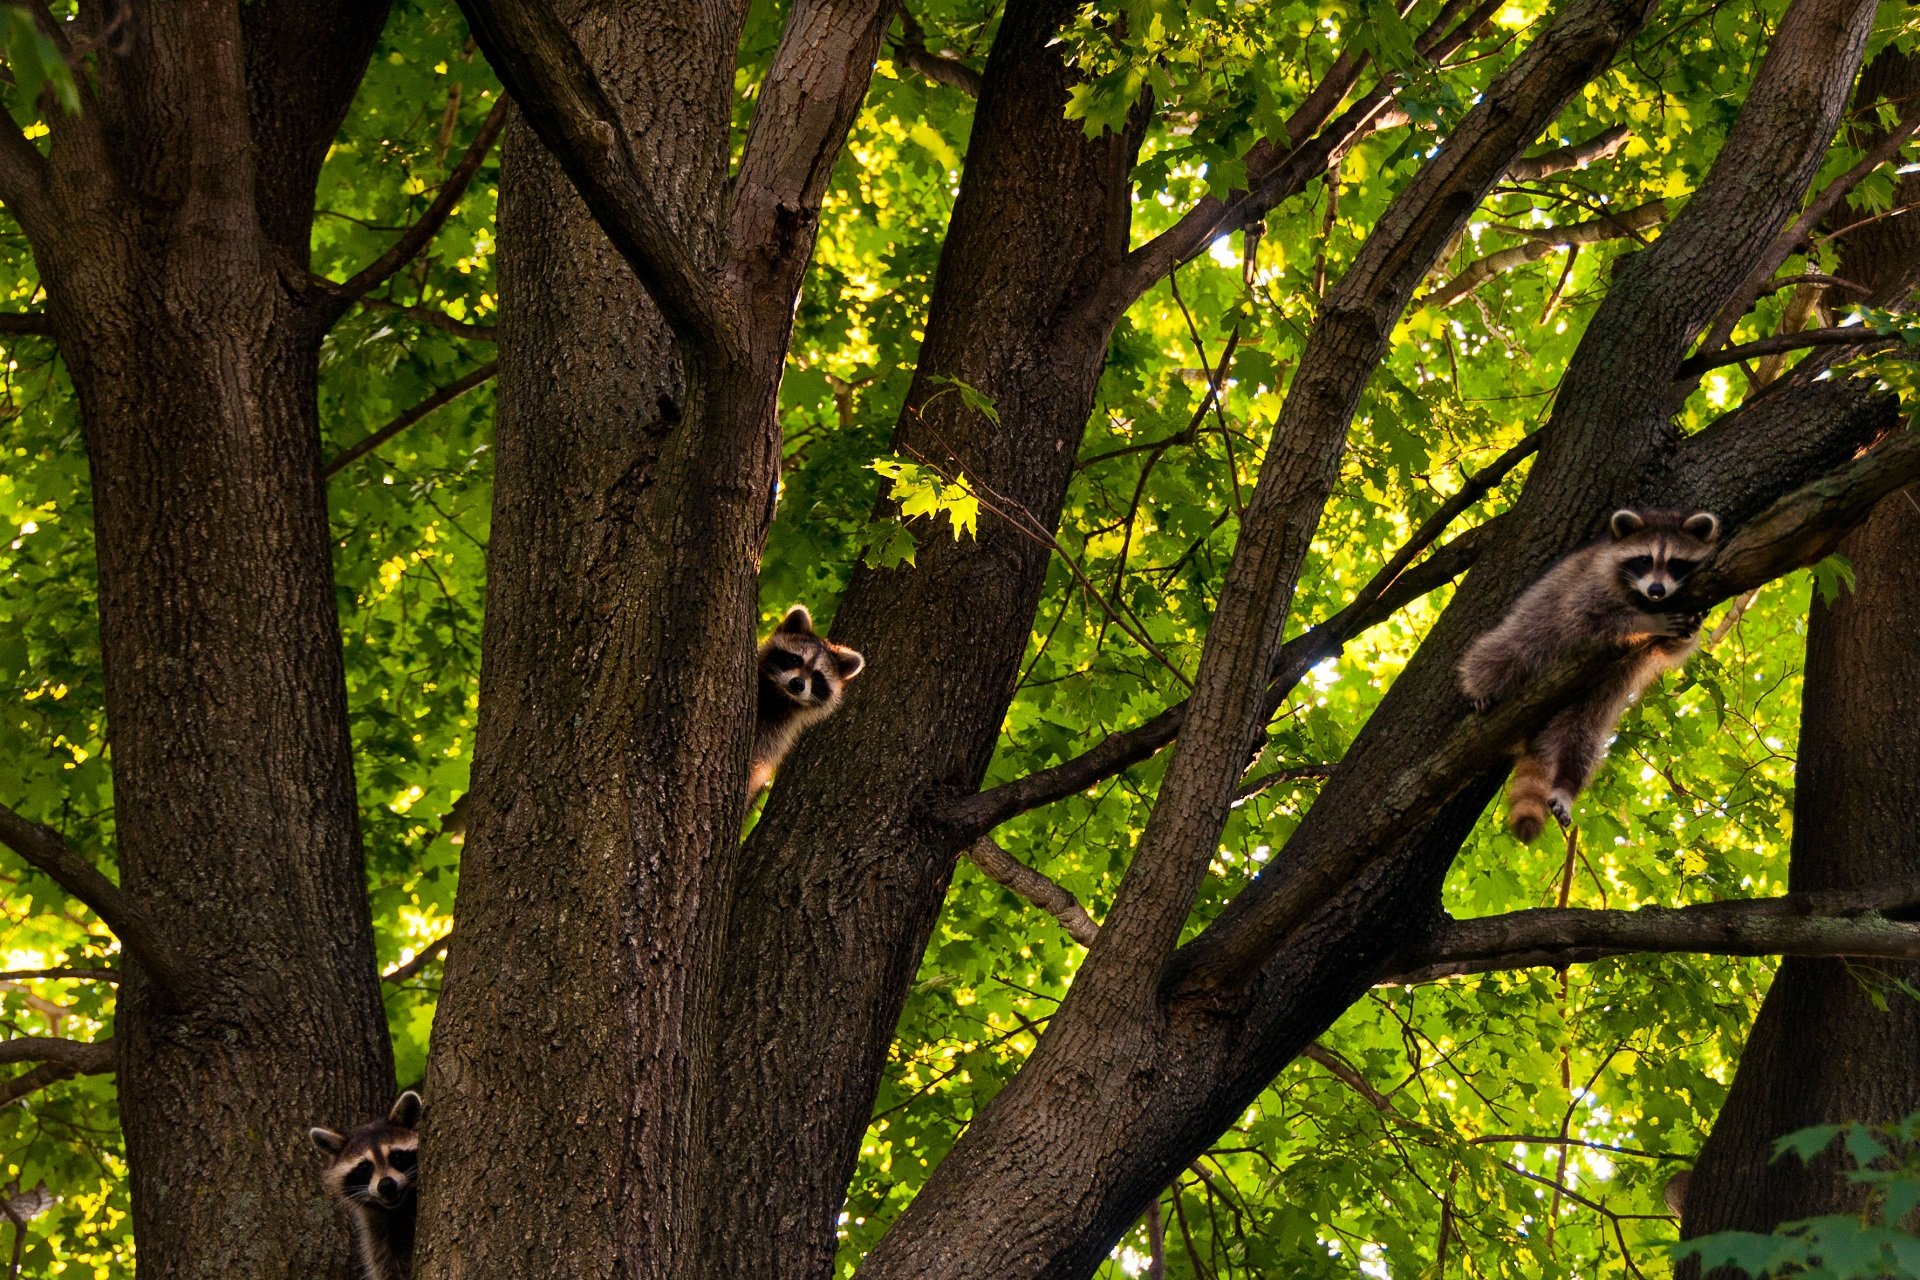 Three raccoons lounge in a tree.